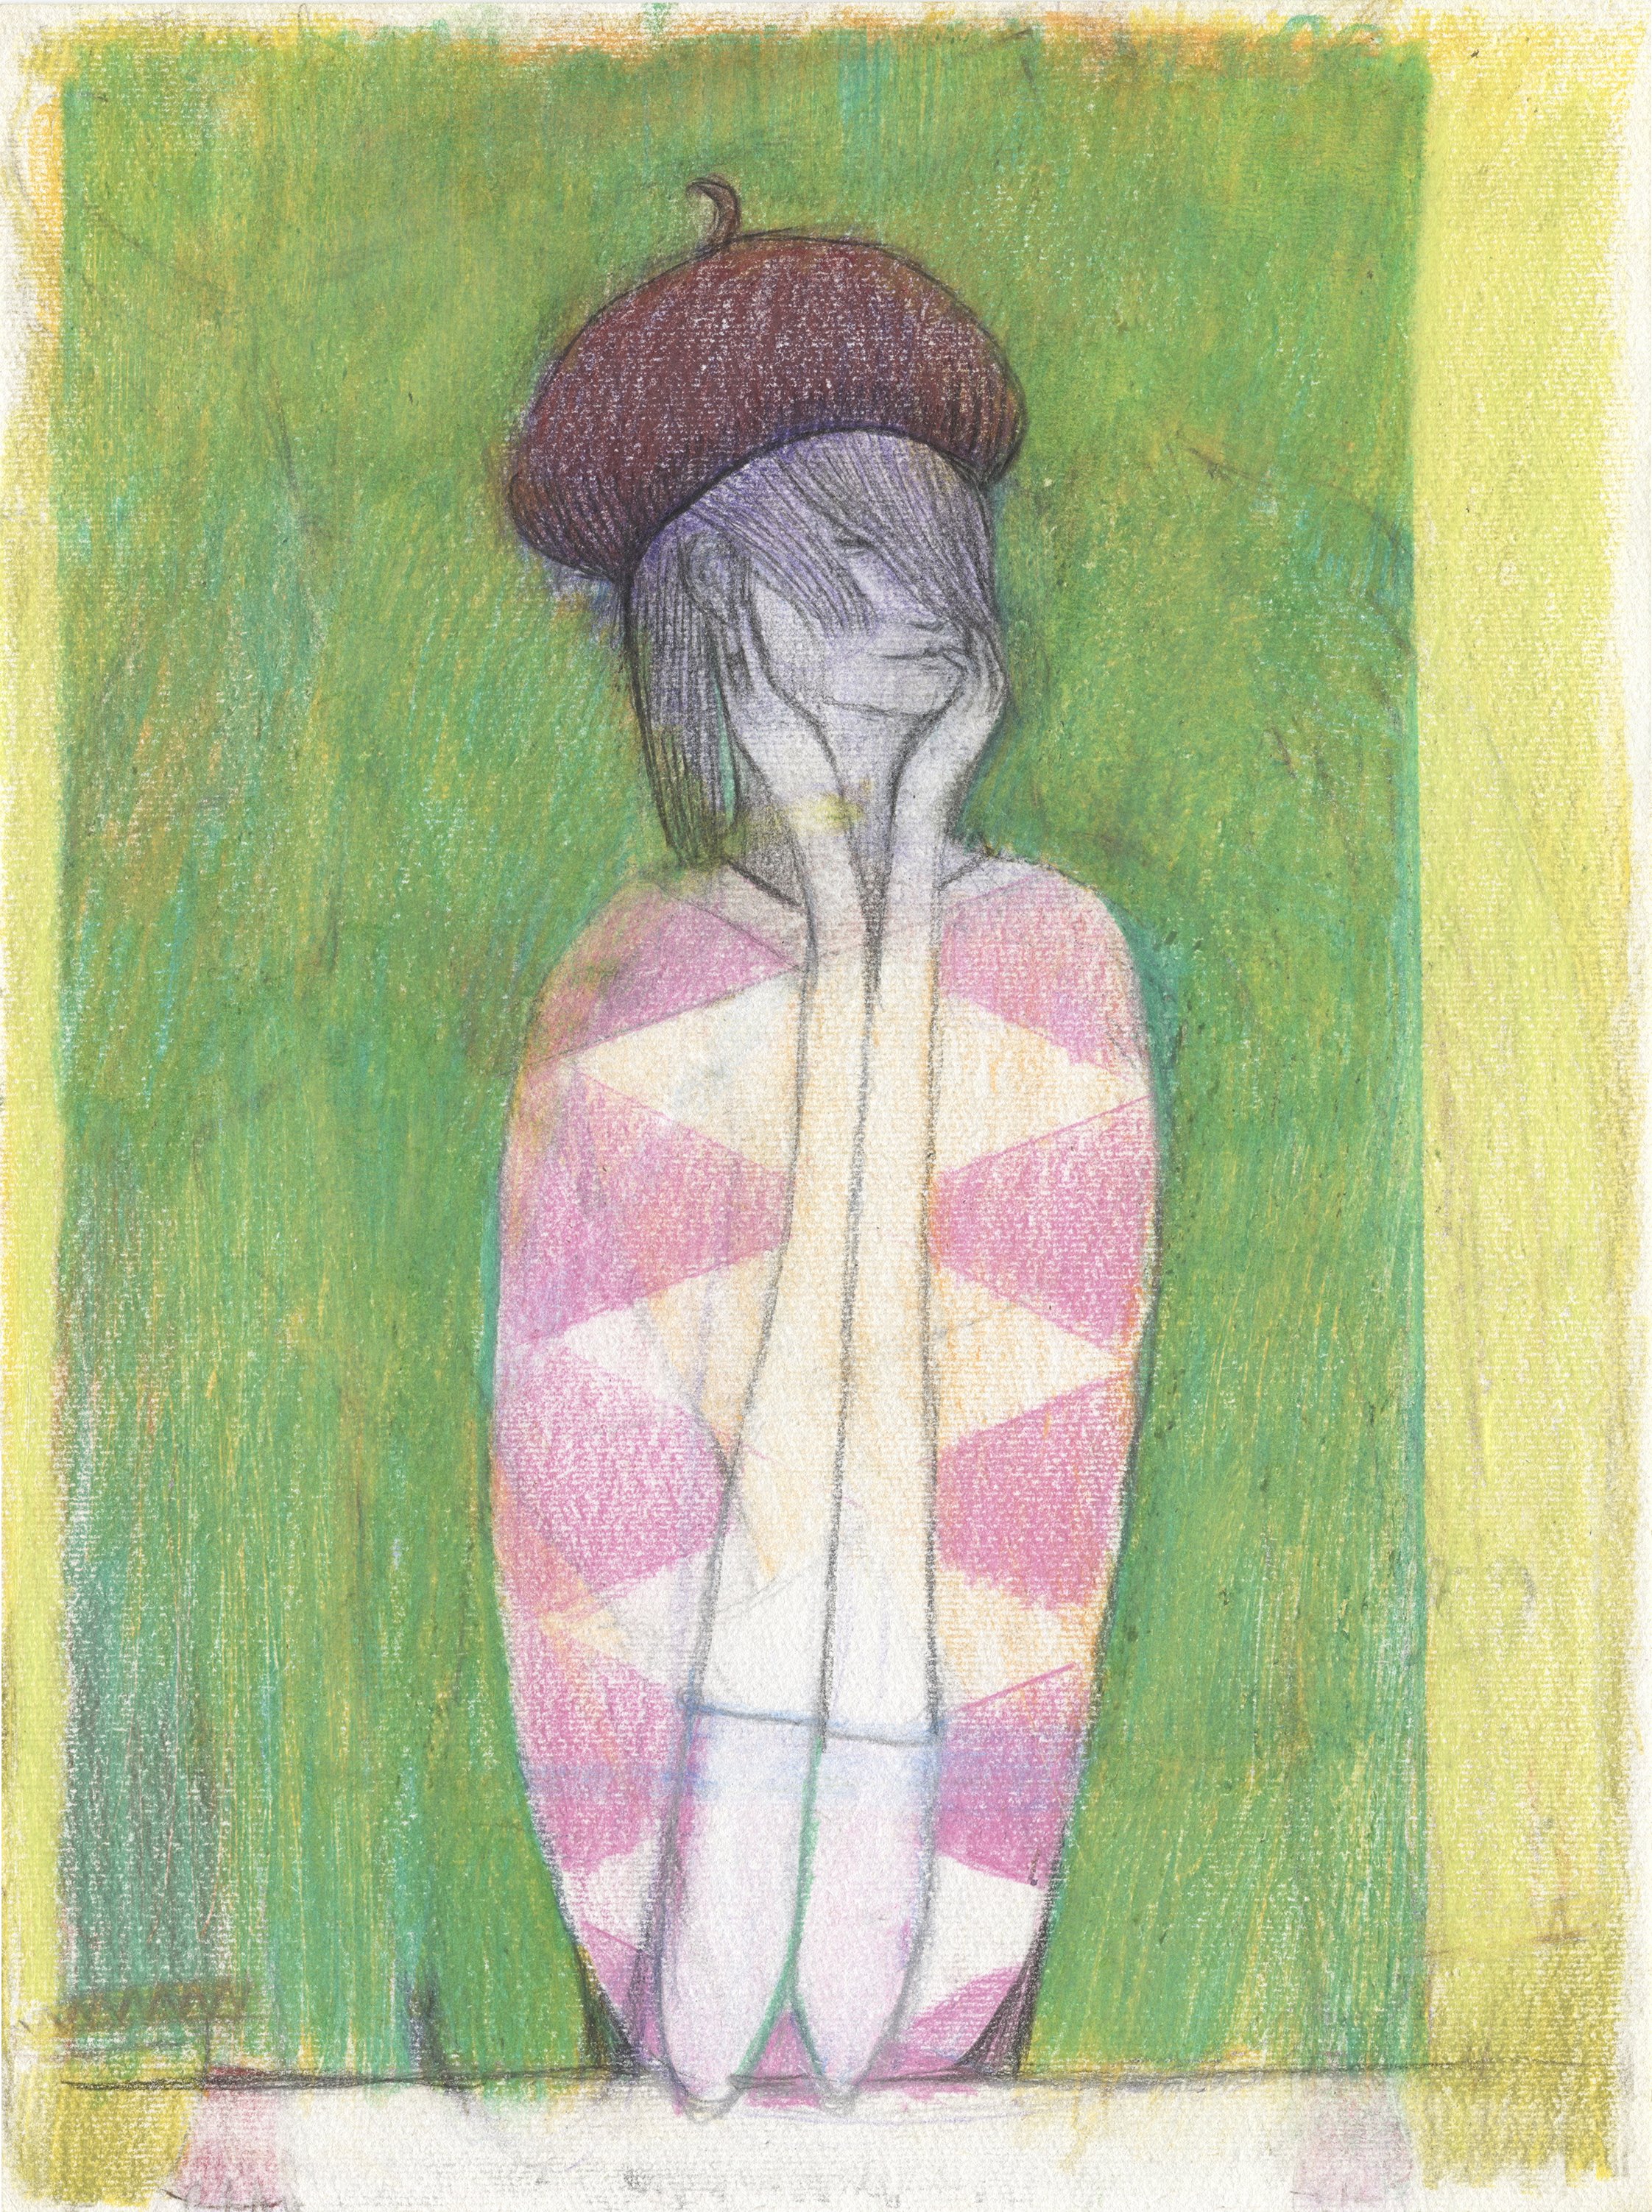  Untitled, Coloured pencil on paper, 34 x 27 cm, 2022 